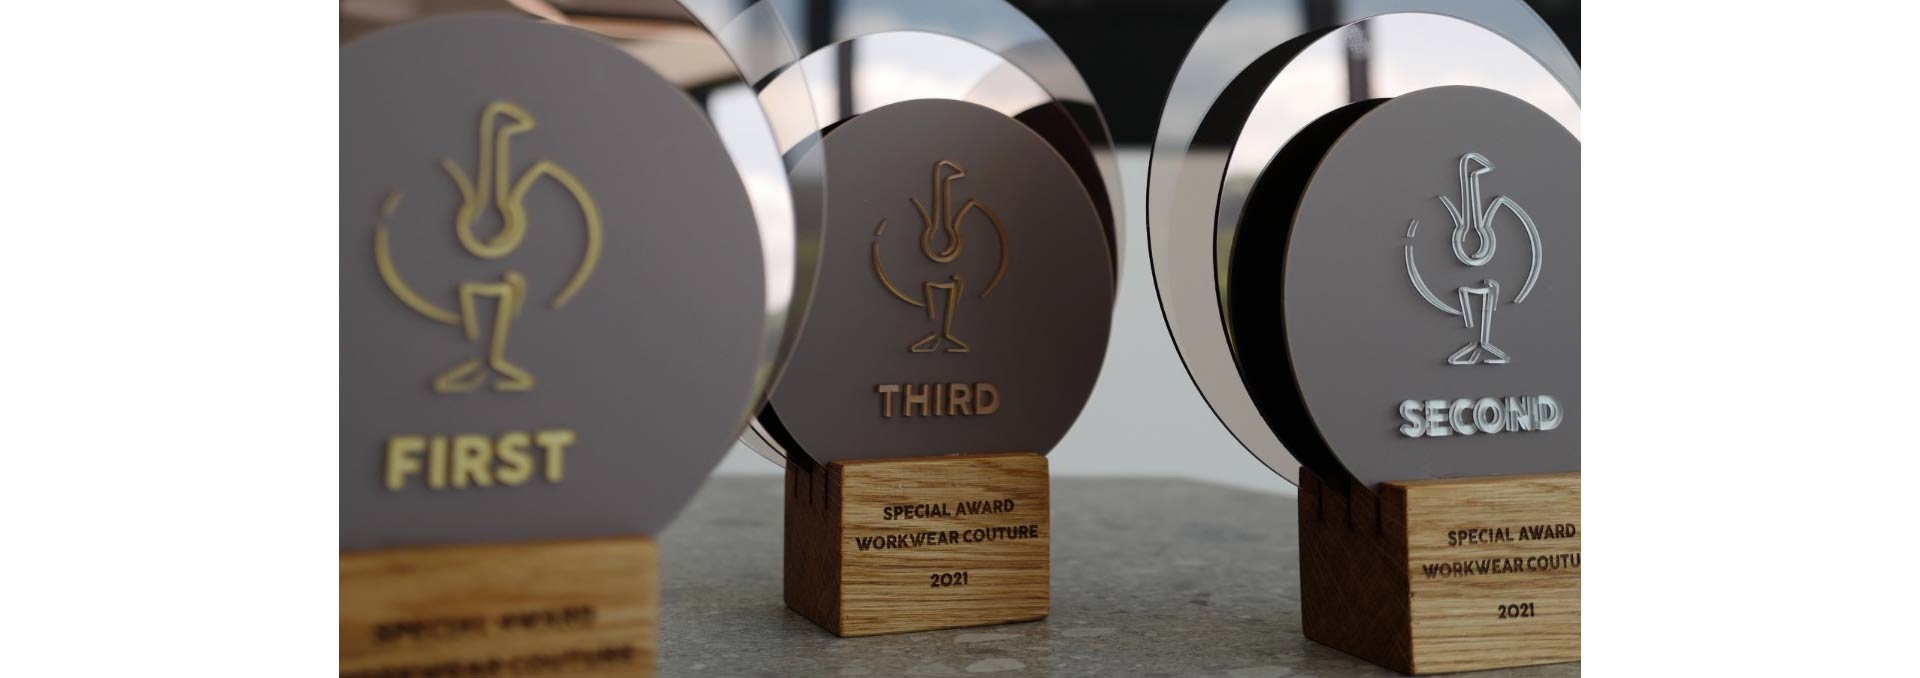 Trophies for the first three places of the Special Award Workwear Couture 2021